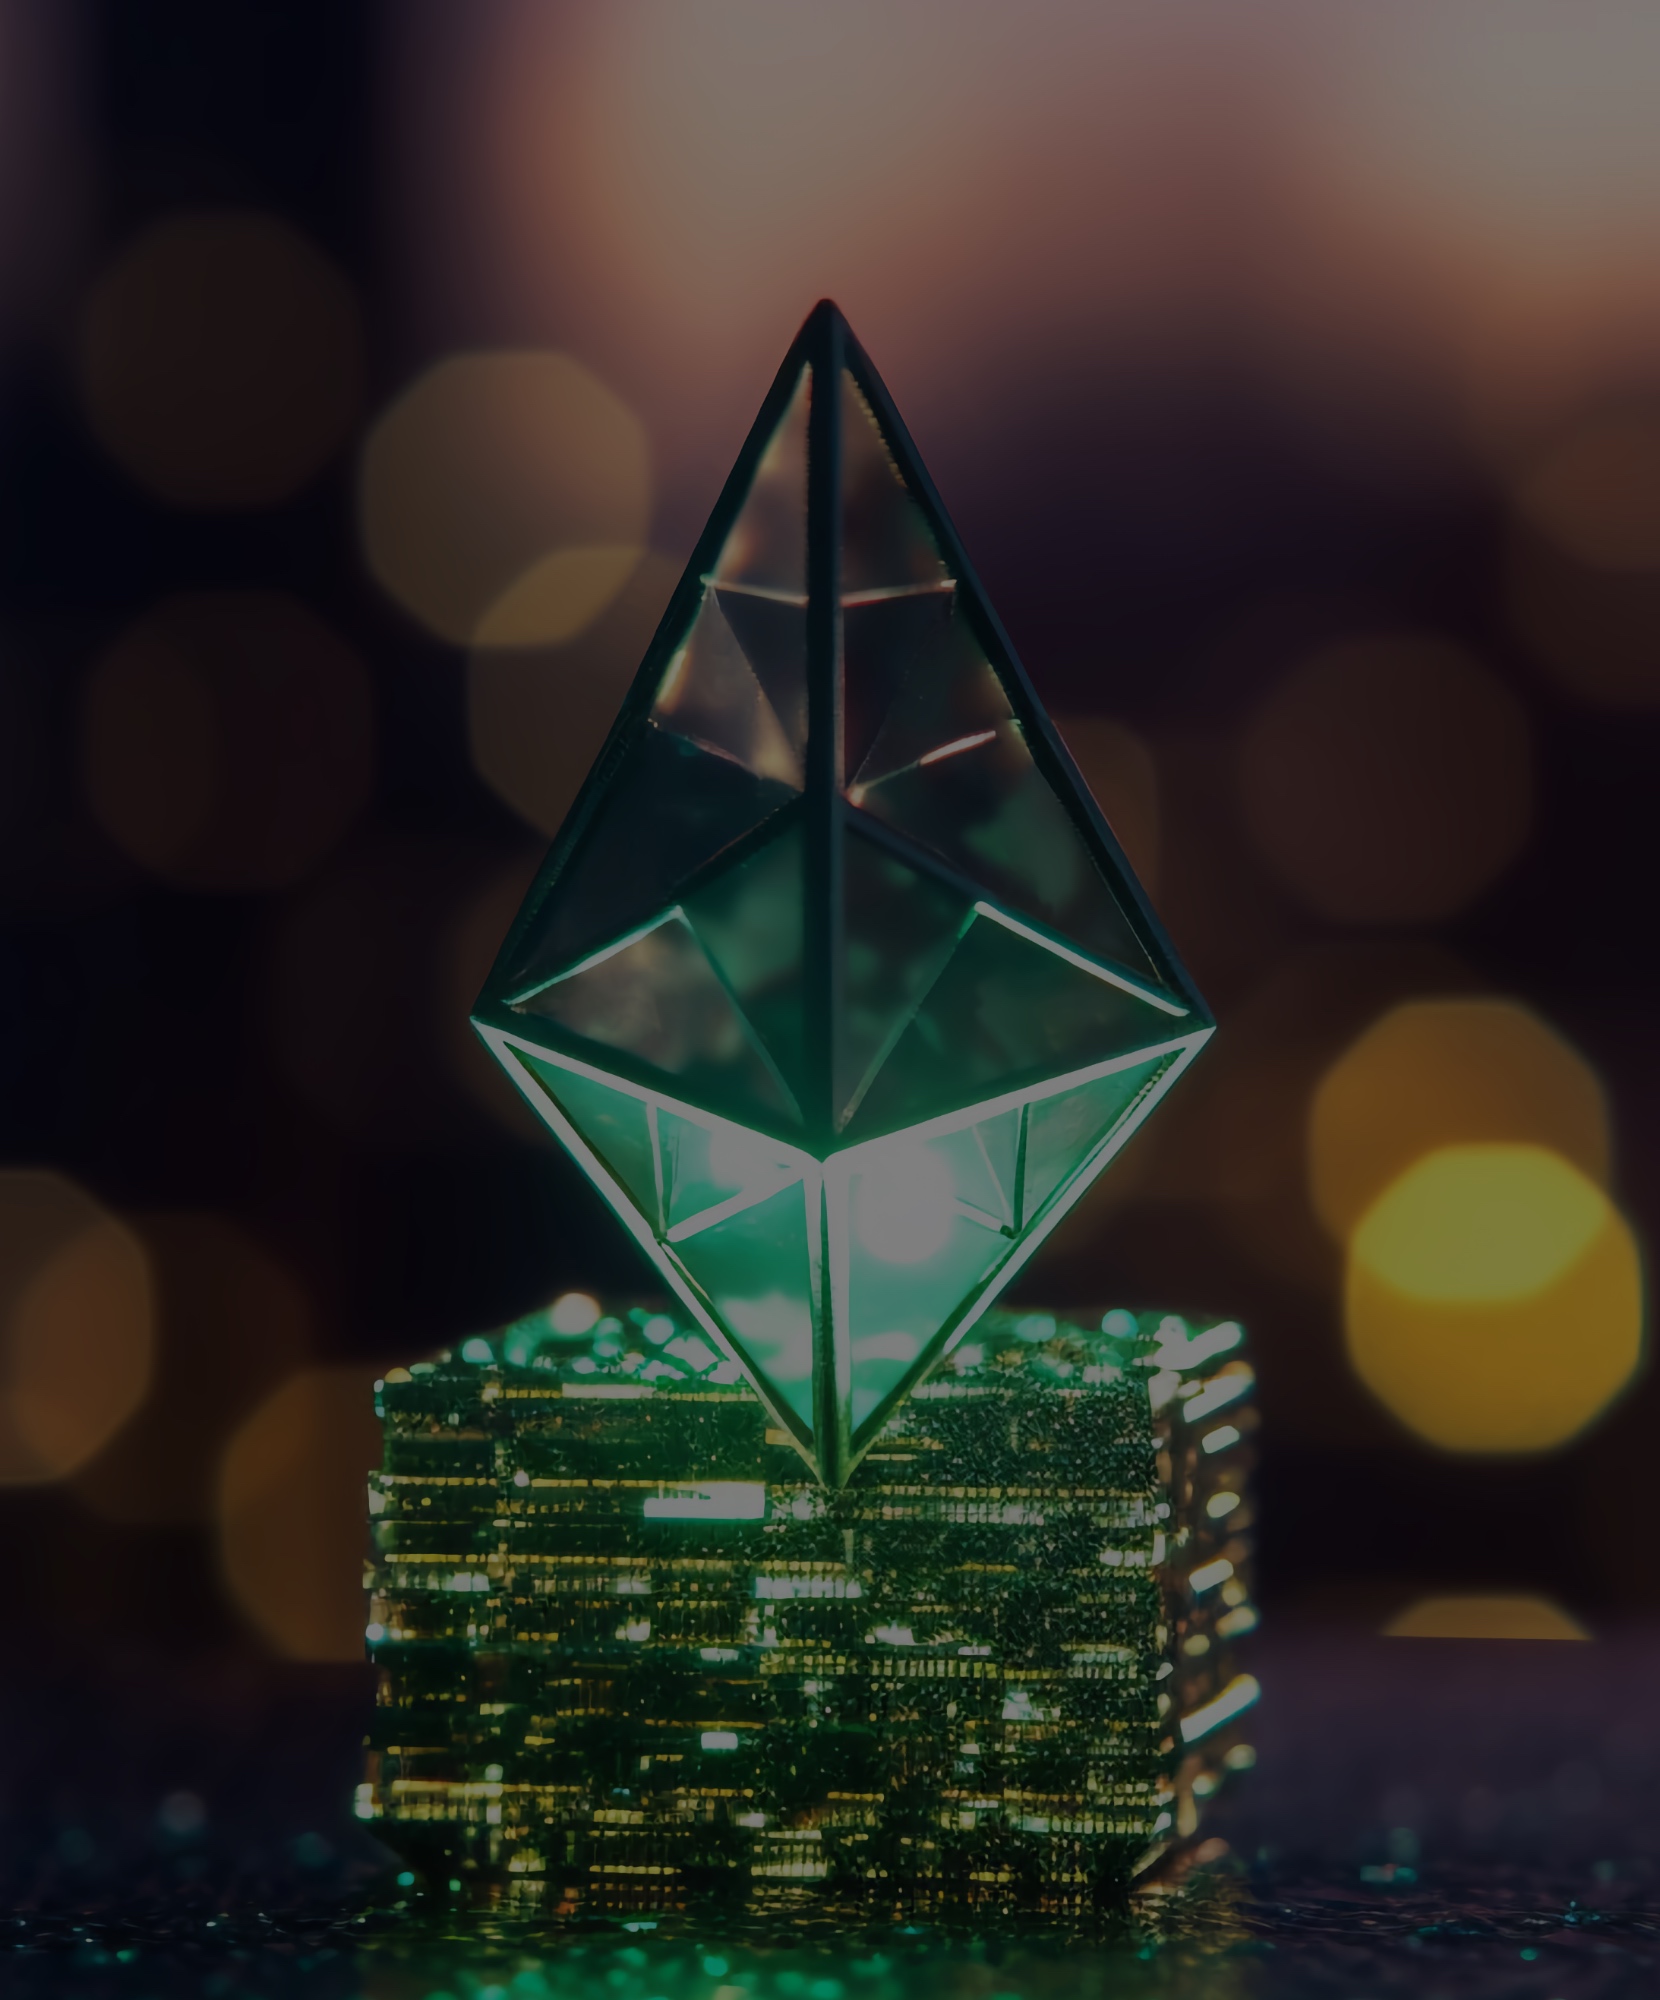 Image of the Ethereum Logo as a green translucent emerald on a computer chip blockchain